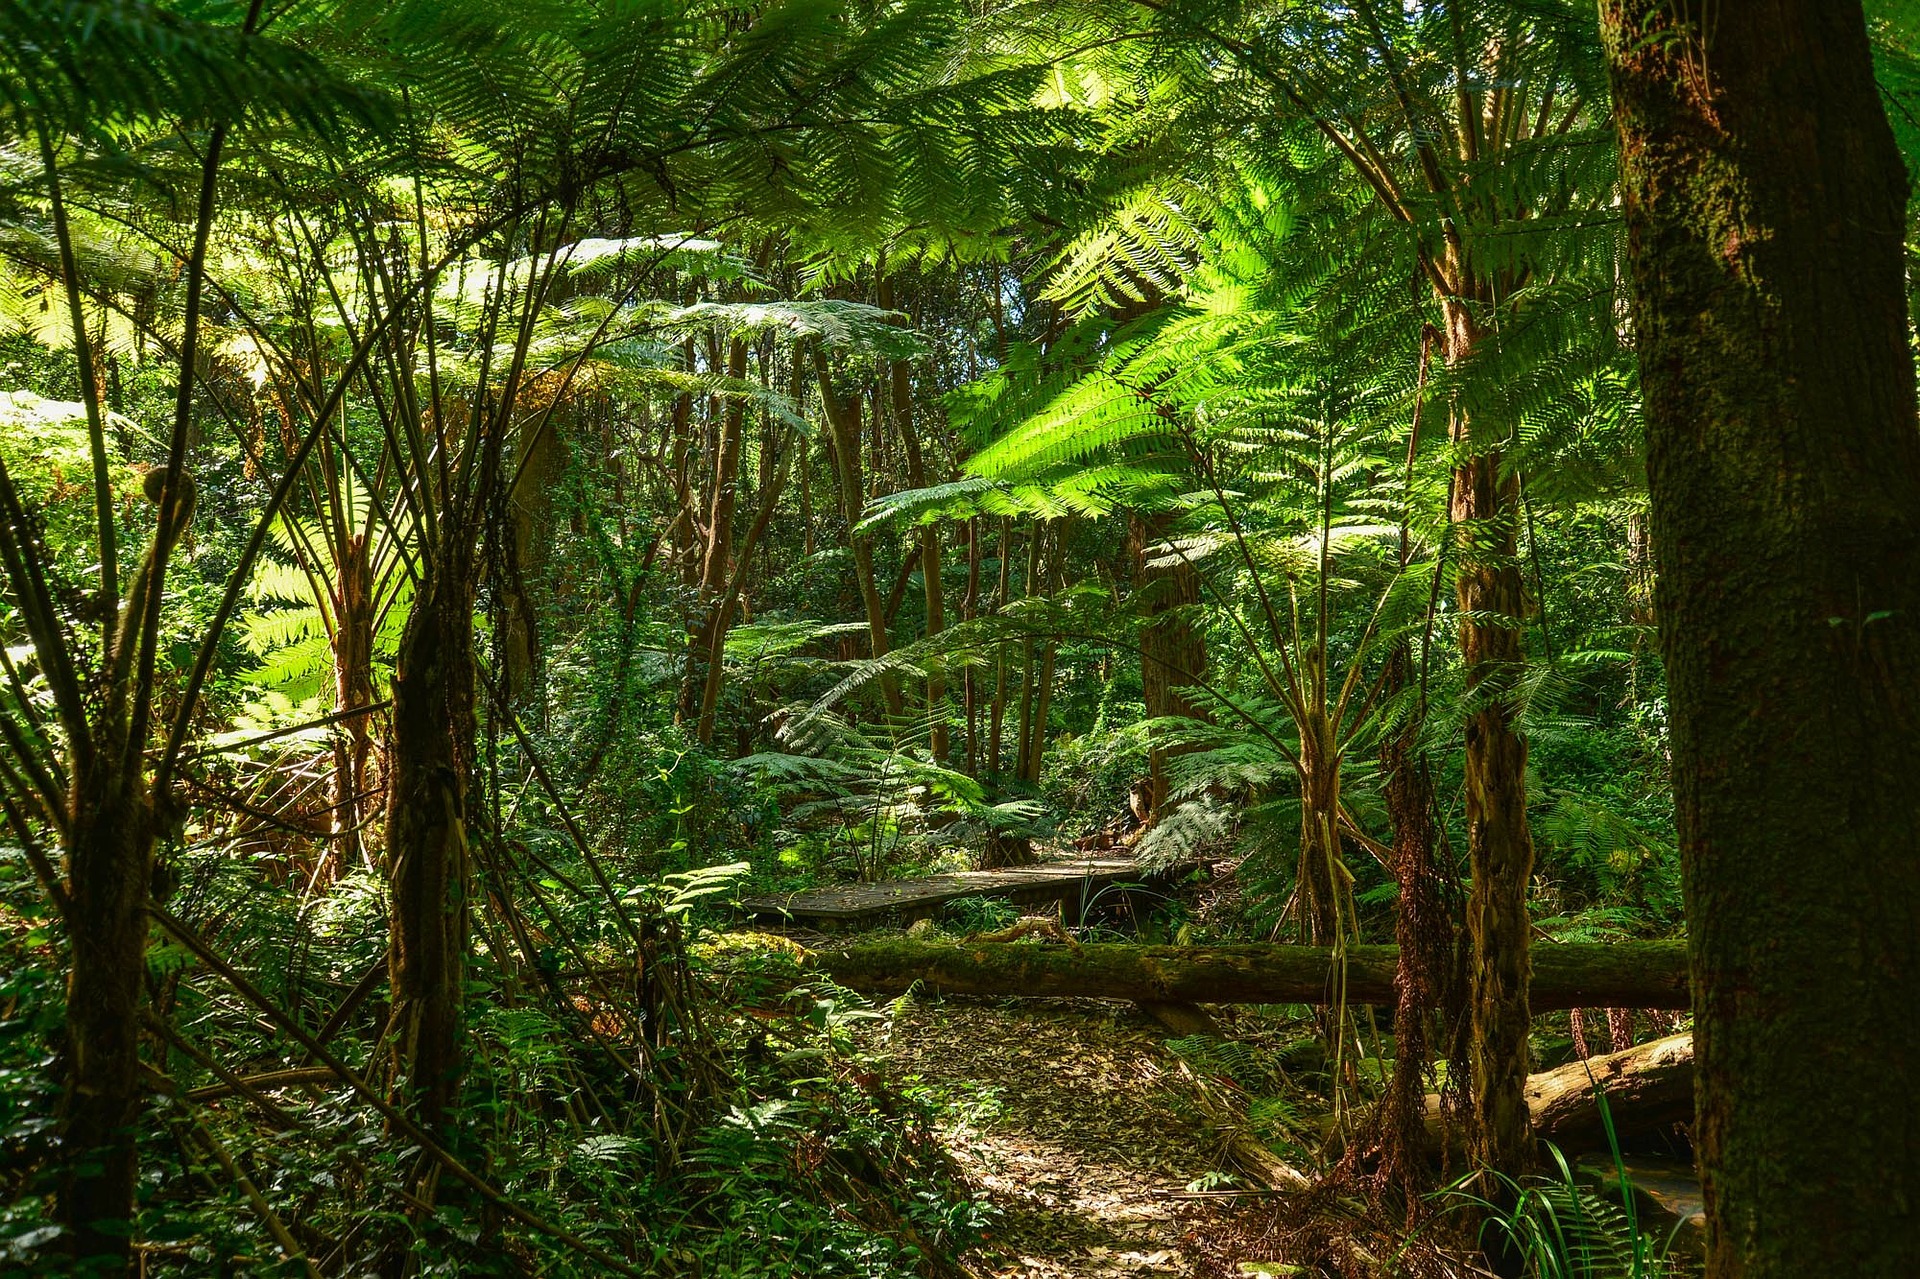 Visit the Great Otway National Park